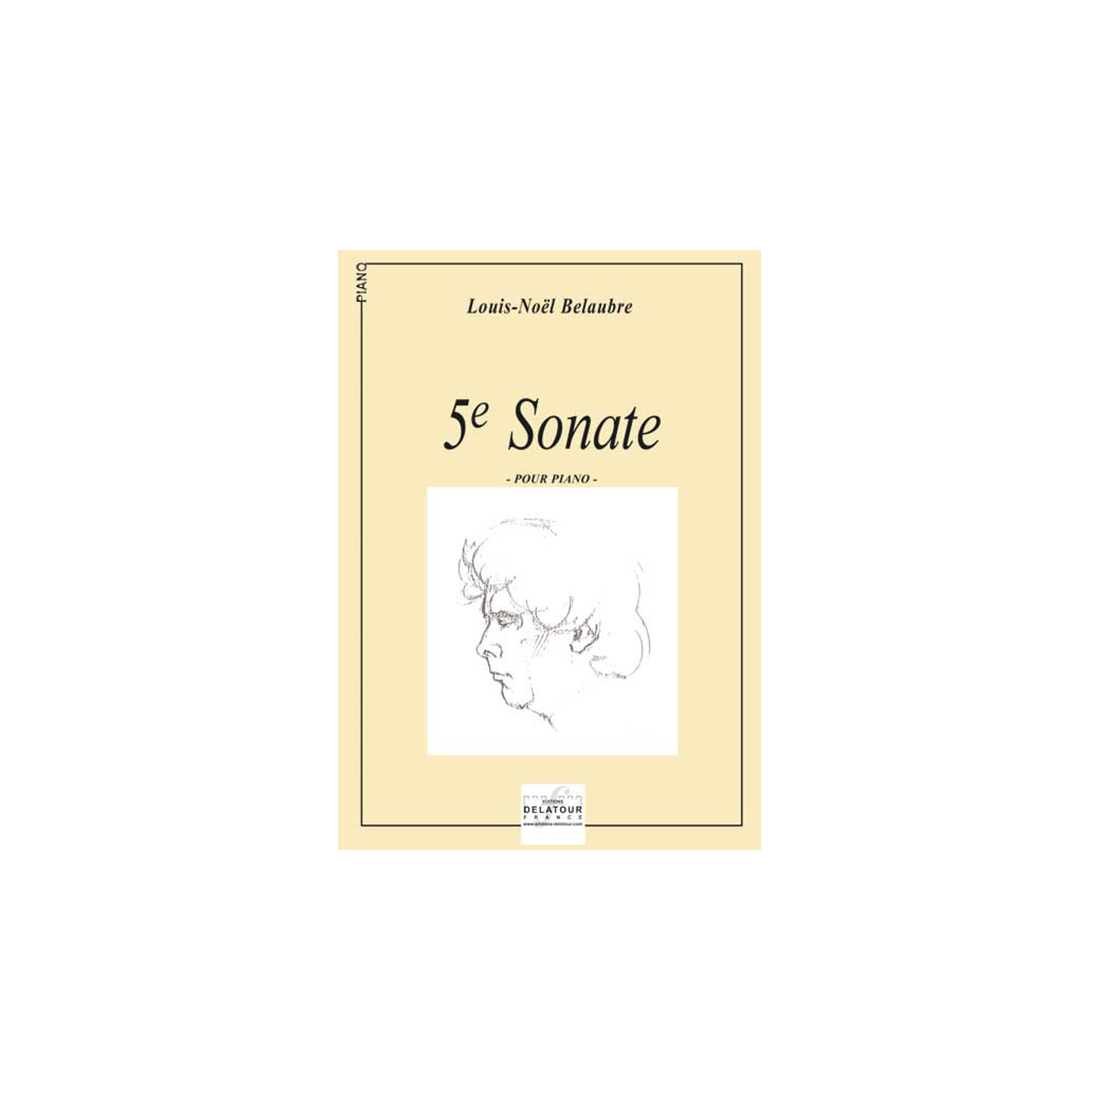 Sonate N° 5 pour piano